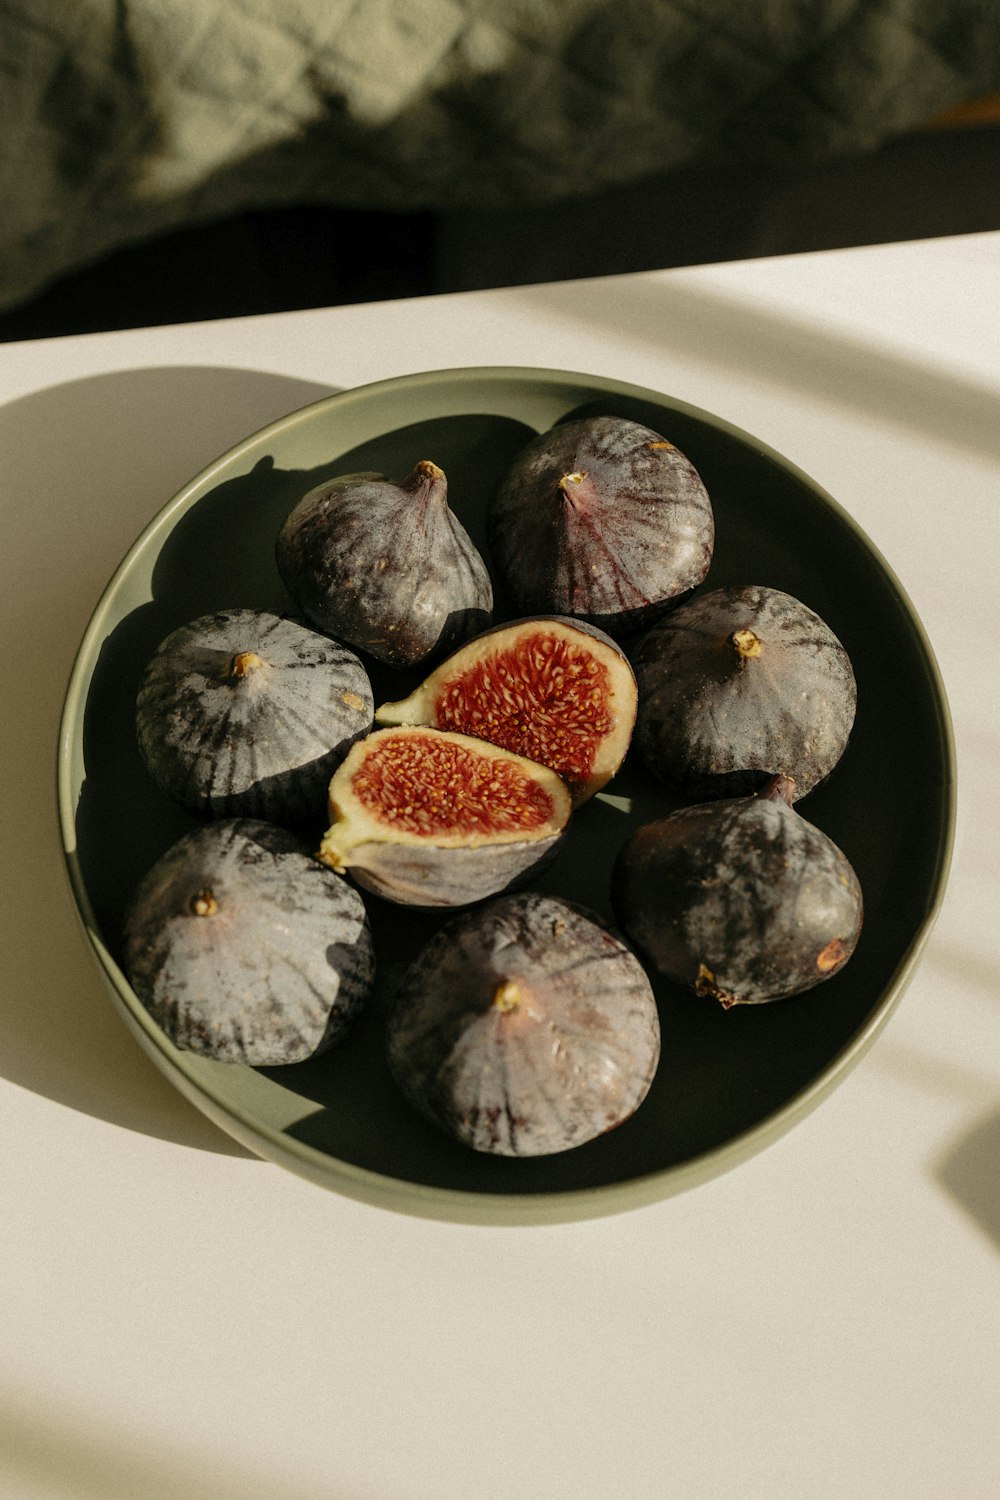 a plate of figs on a table